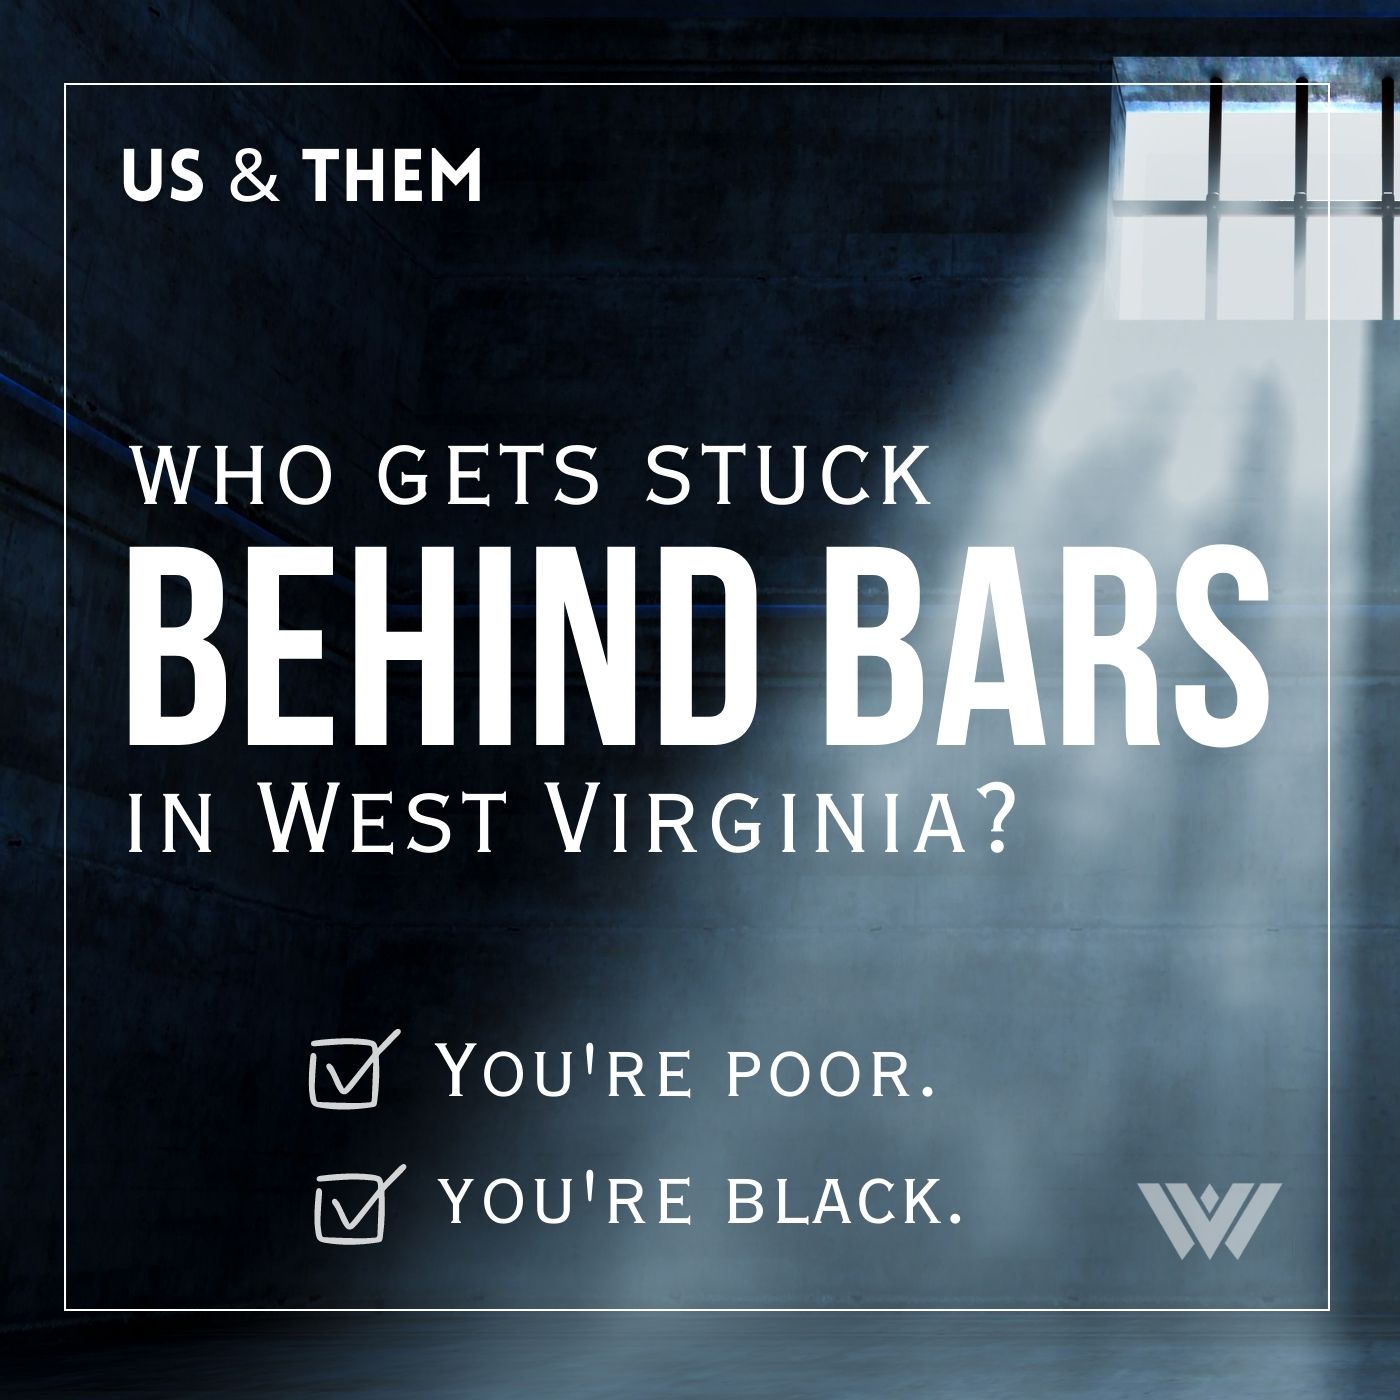 Us & Them: Who Gets Stuck Behind Bars In West Virginia?